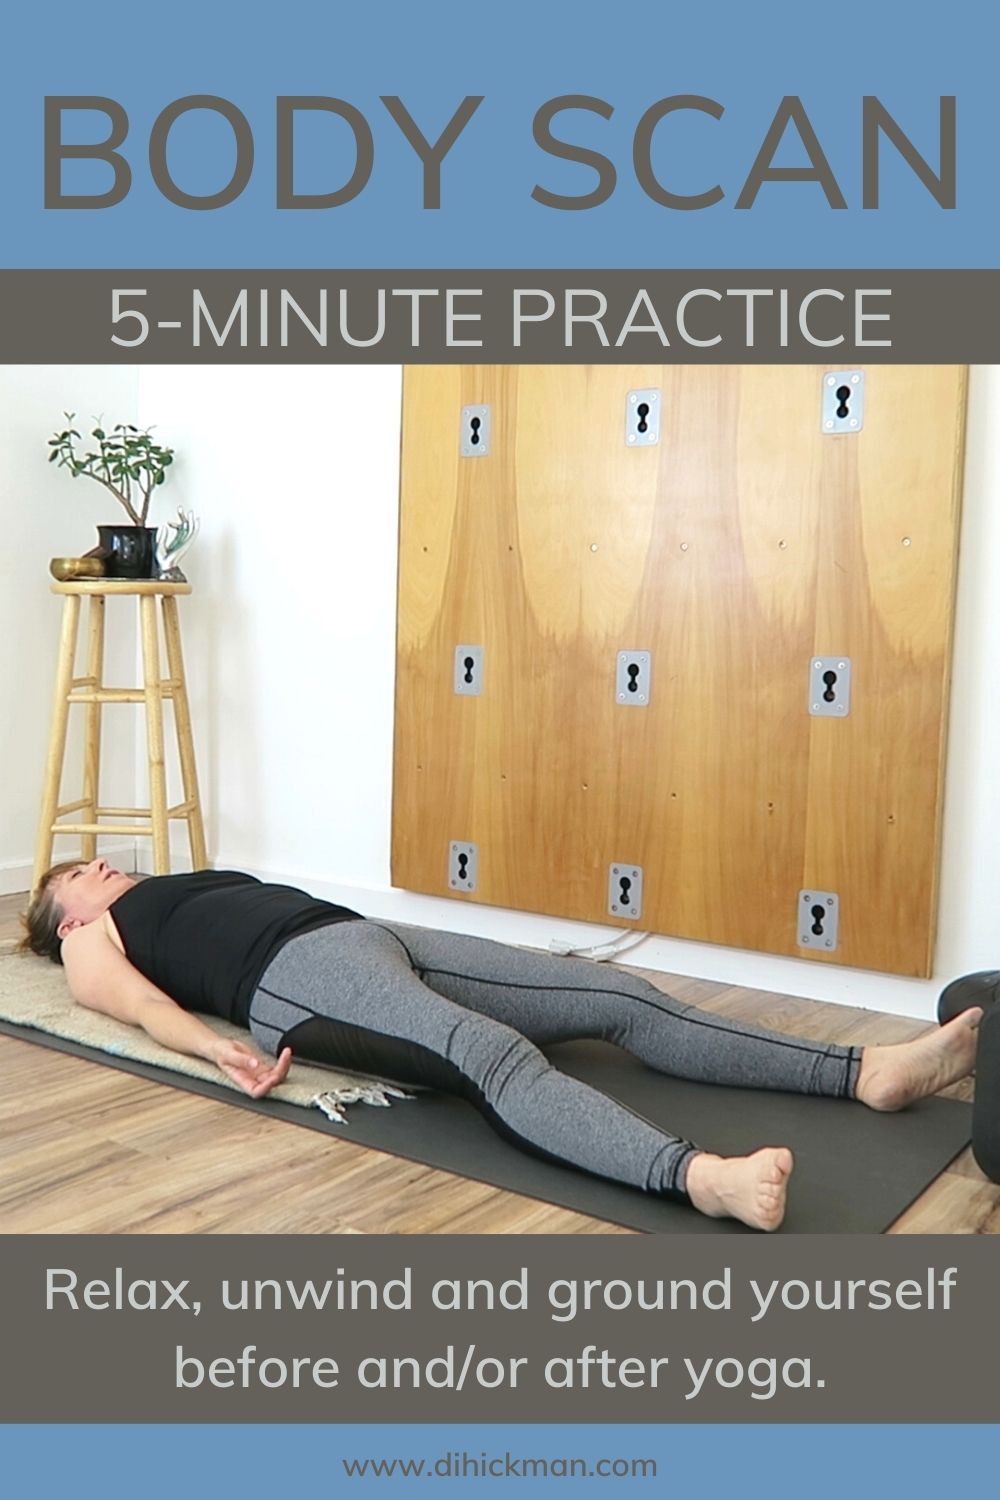 Body scan 5-minute practice. Relax, unwind and ground yourself before and/or after your yoga